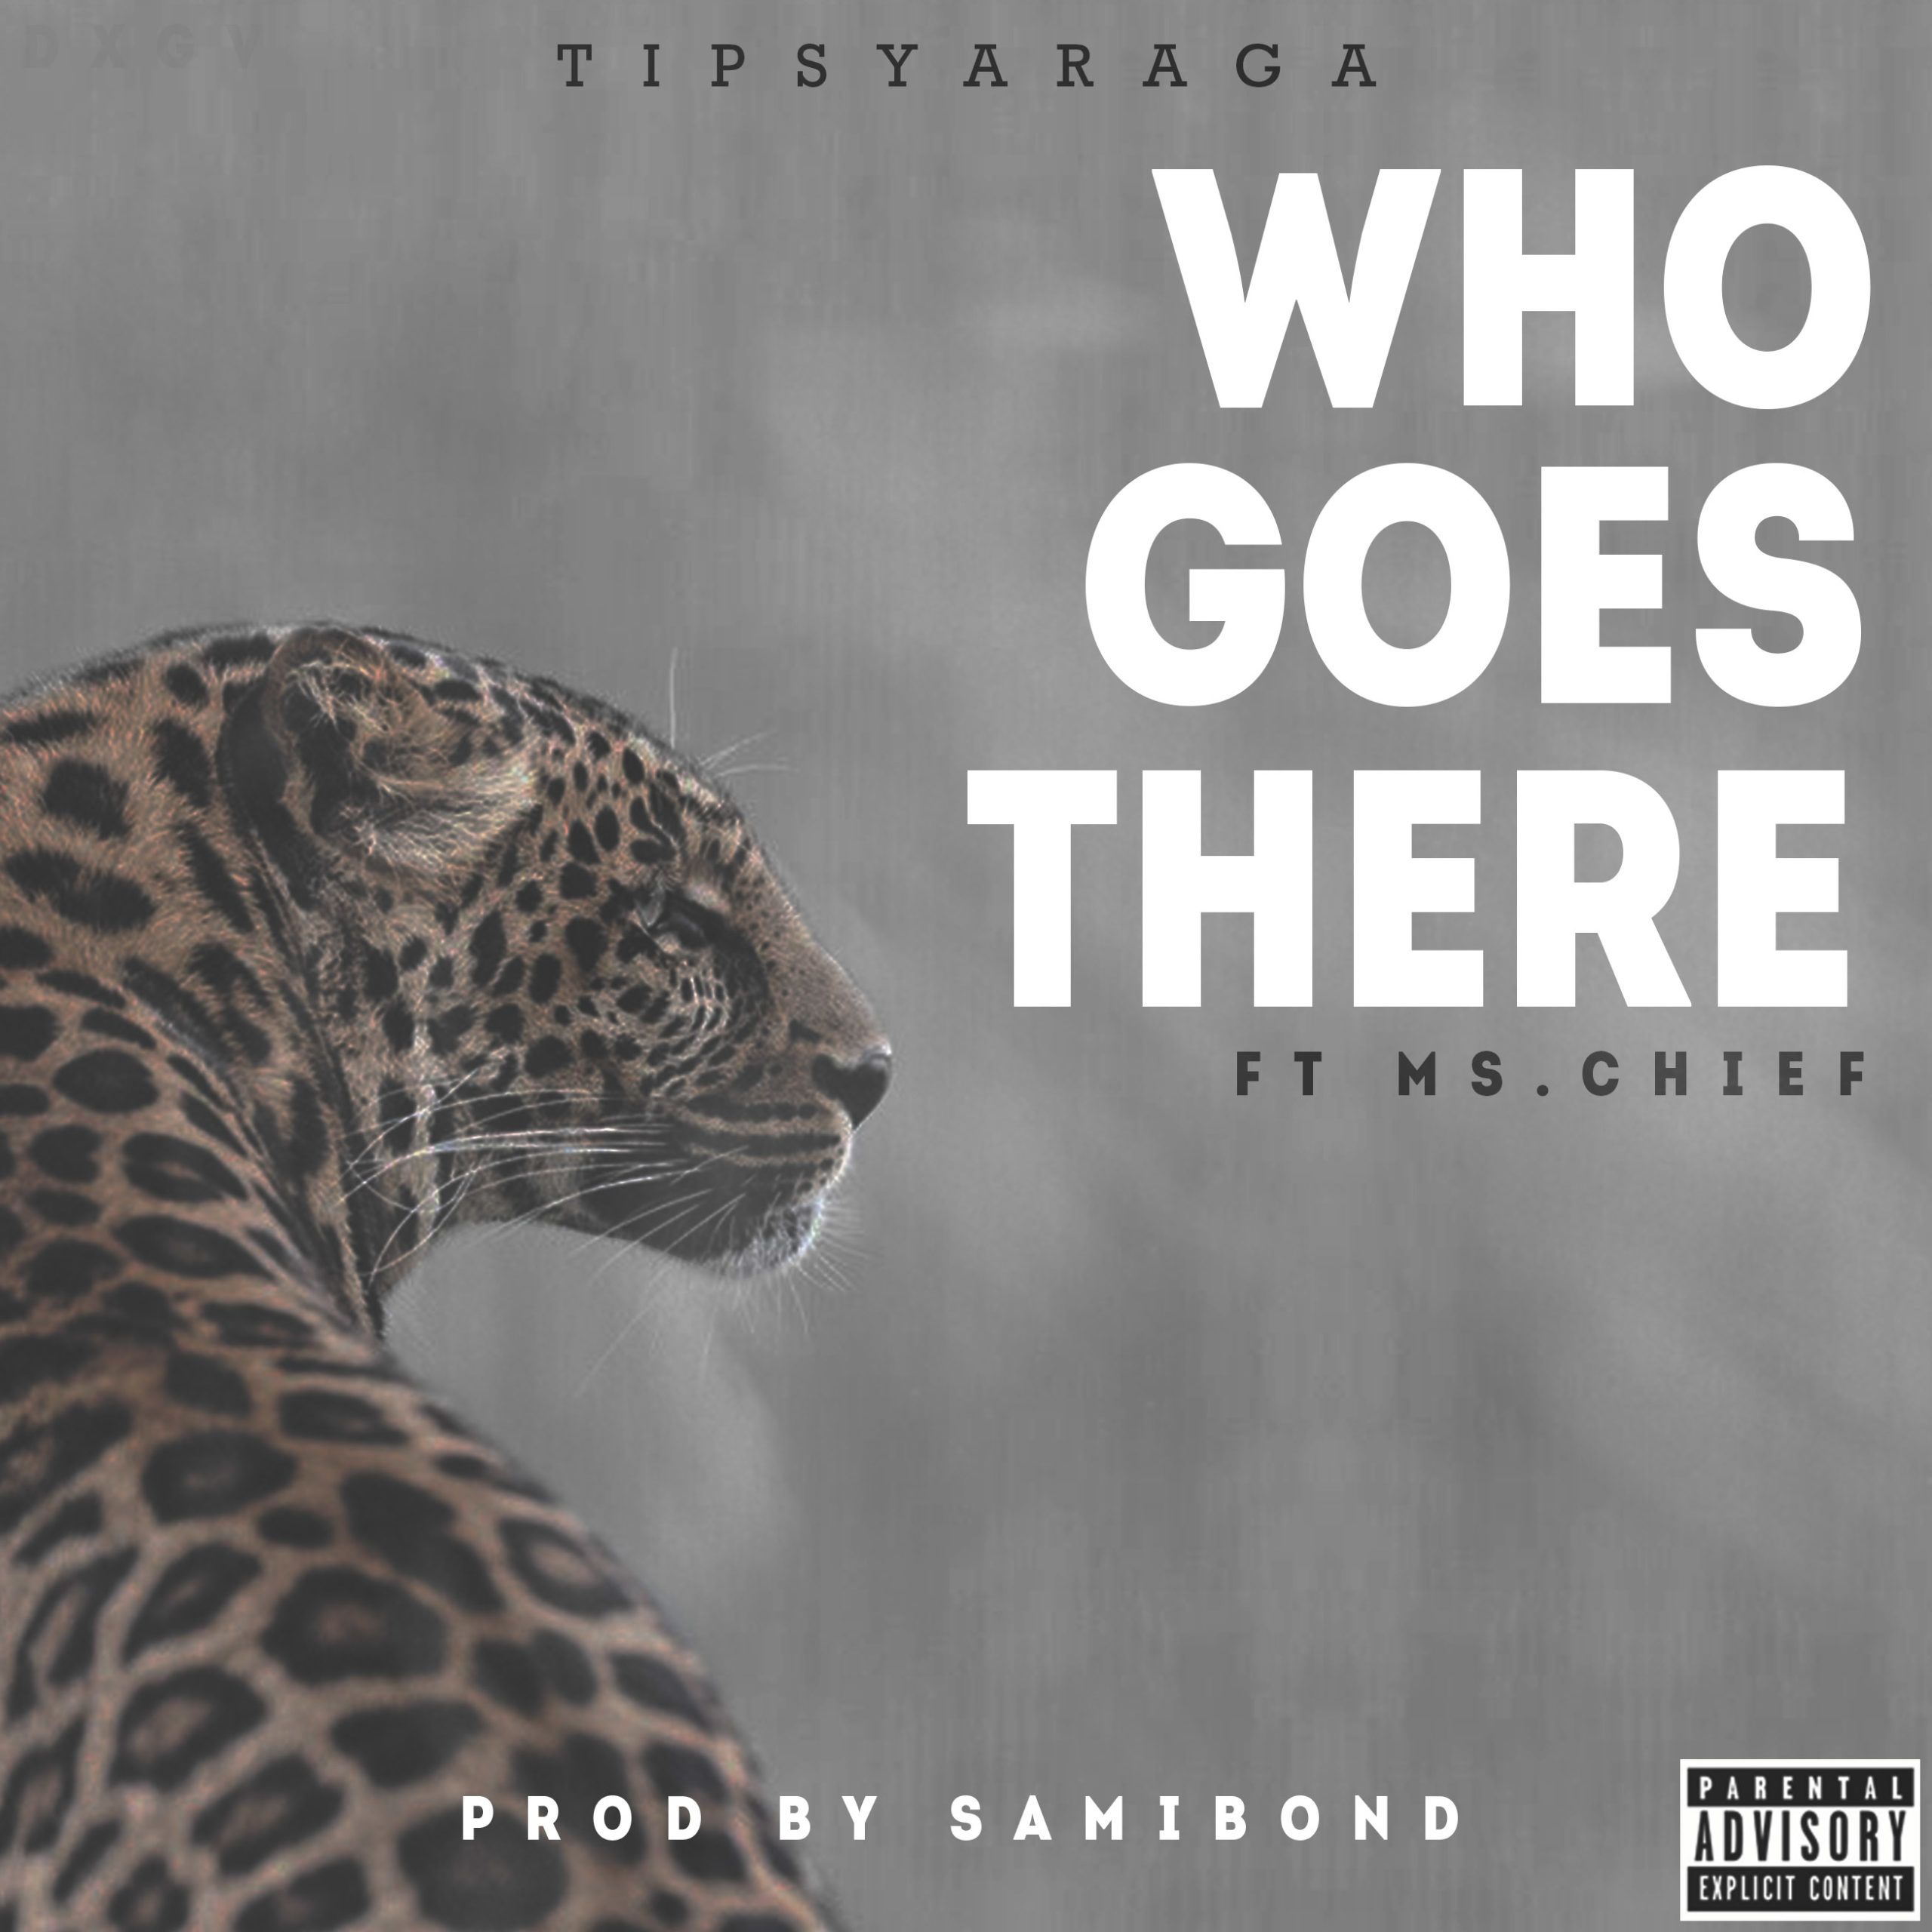 Tipsy Araga ft. Ms. Chief - WHO GOES THERE [prod. by Samibond] Artwork | AceWorldTeam.com